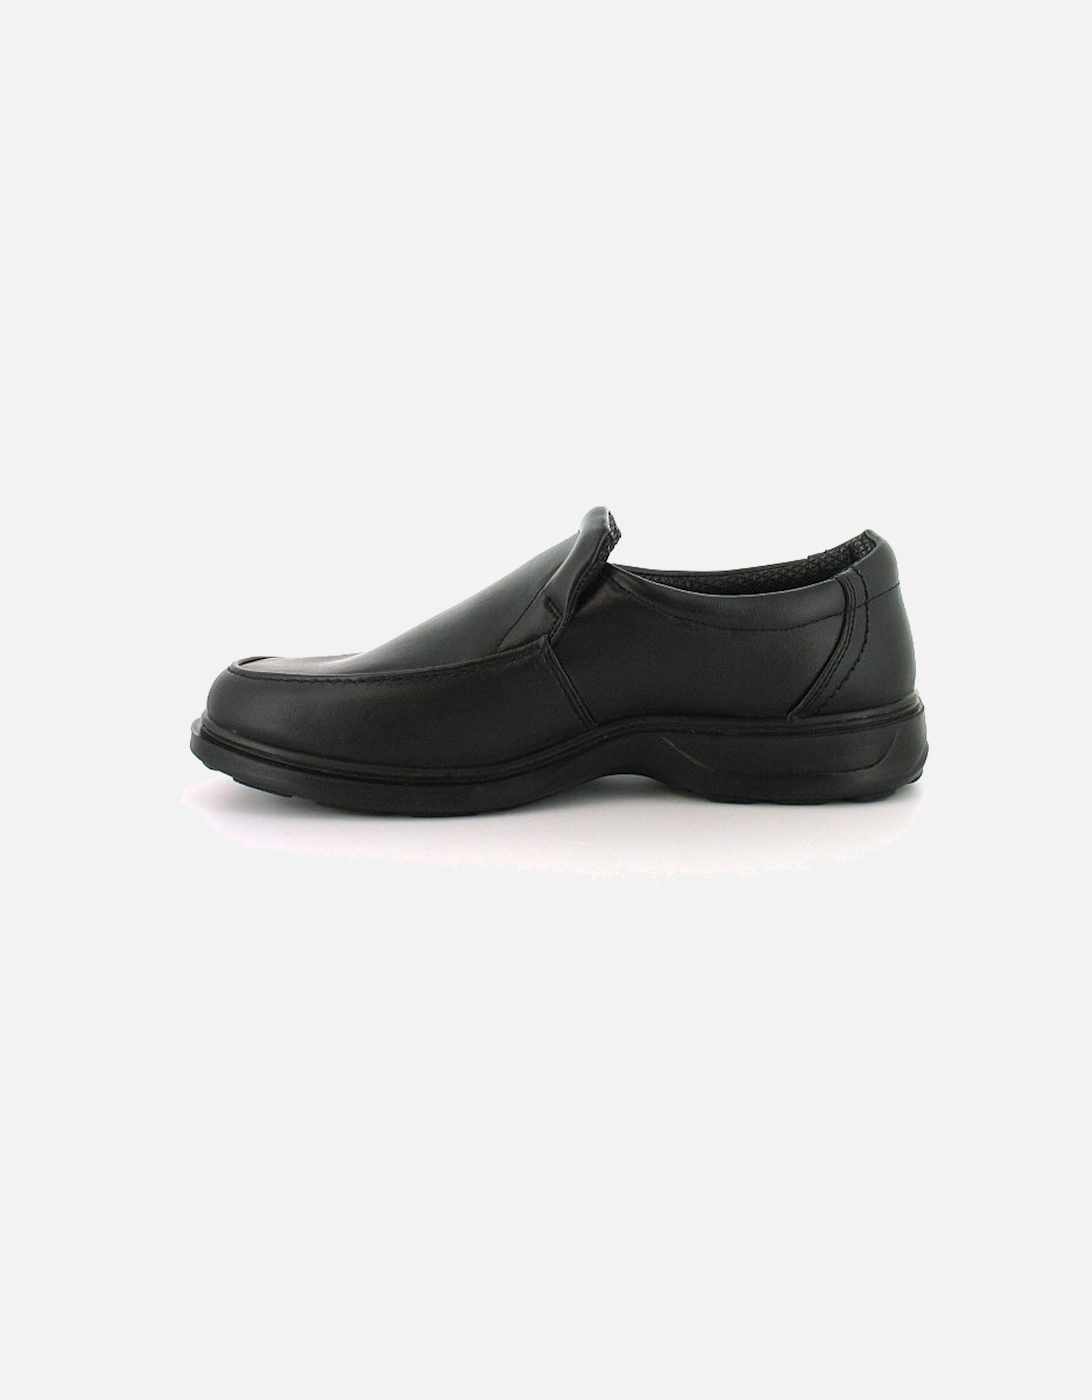 Mens Casual Shoes Wide Robin Slip On black UK Size